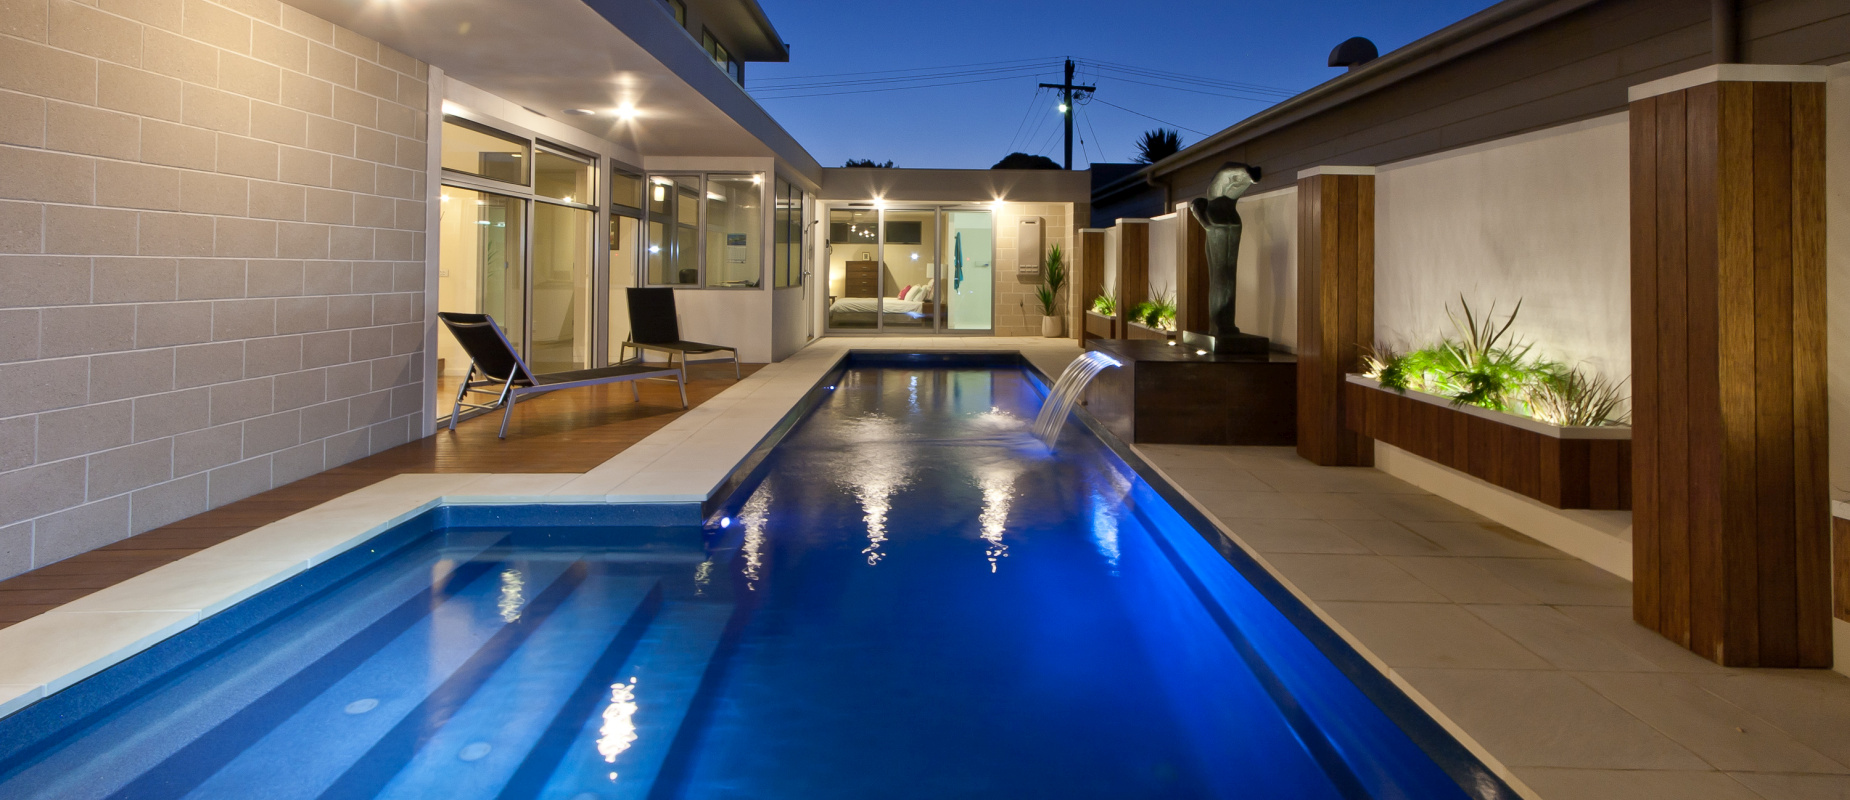 Compass-Pools-Australia_Fastlane-pool-for-swimming-laps-with-water-wall-feature-and-lights